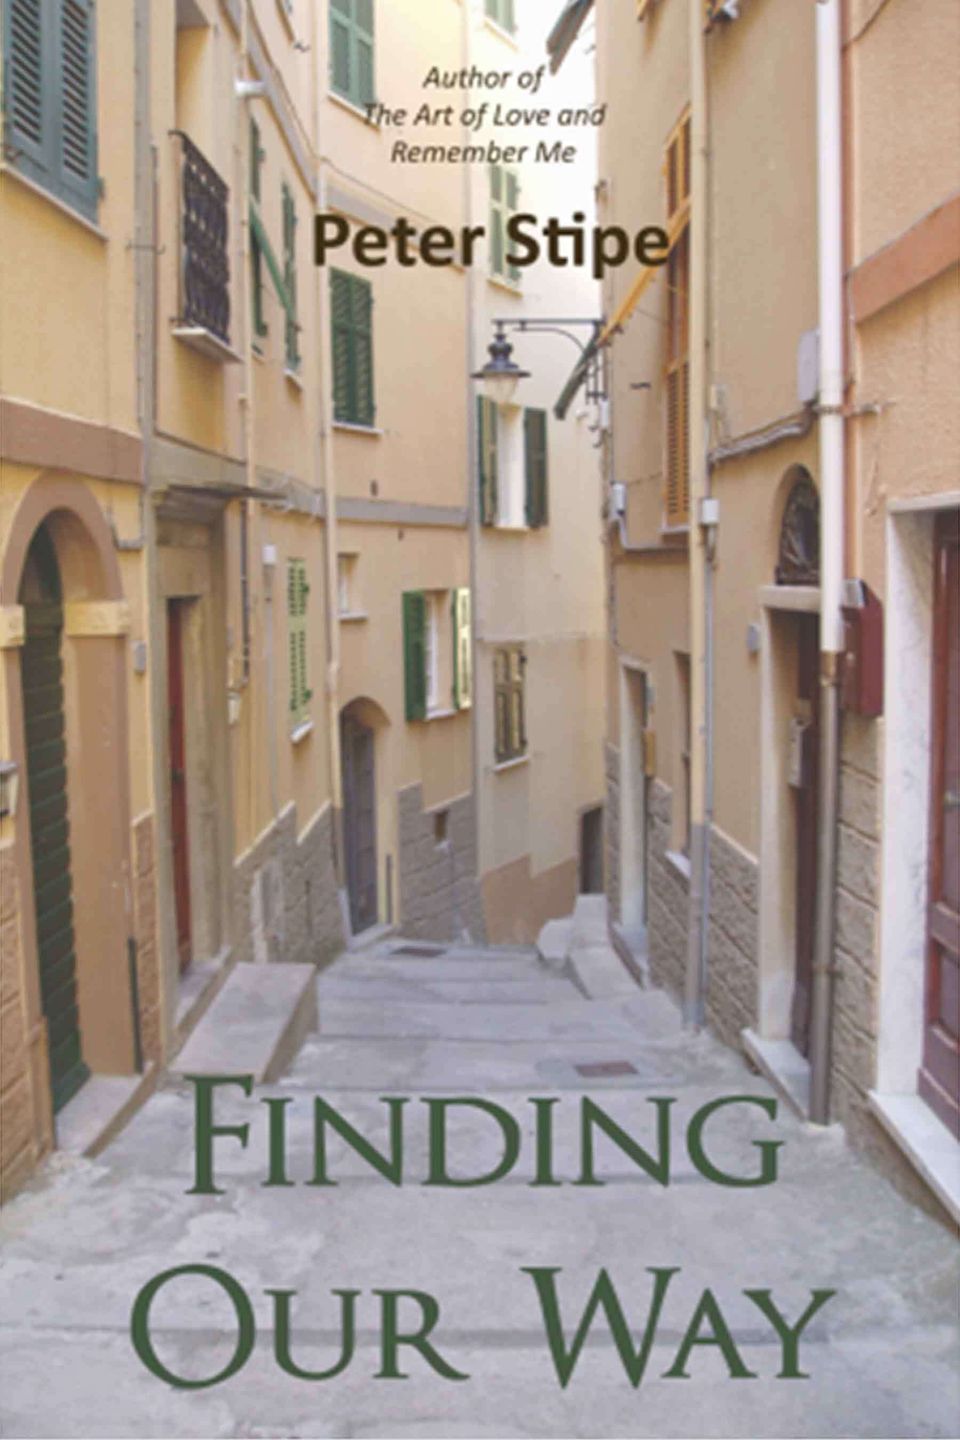 Peter stipe finding our way